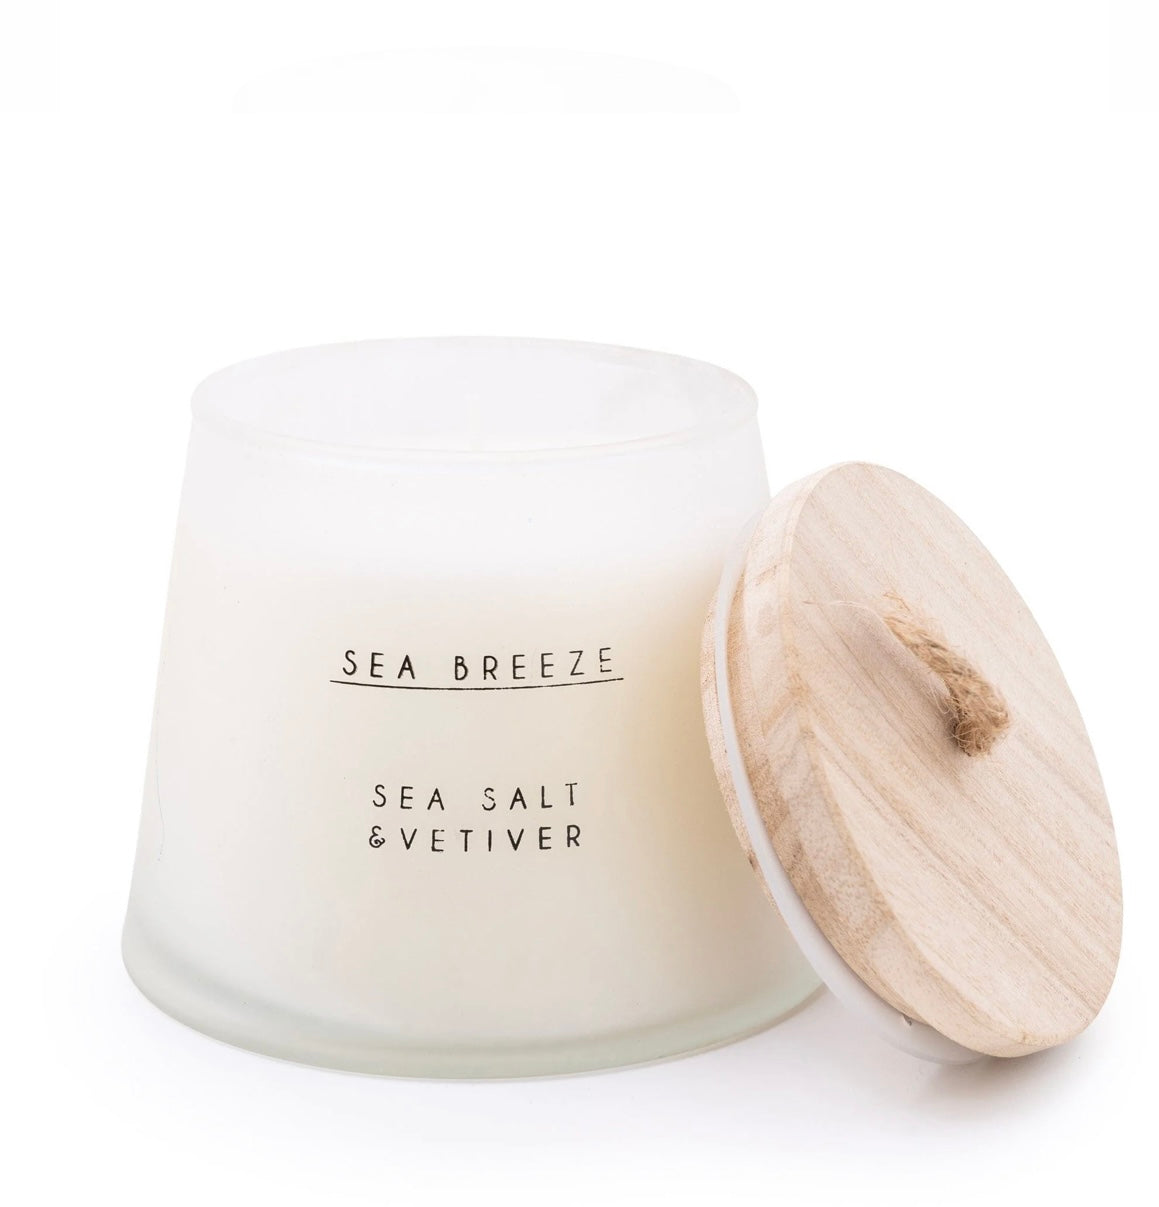 Sea breeze lidded scented candle